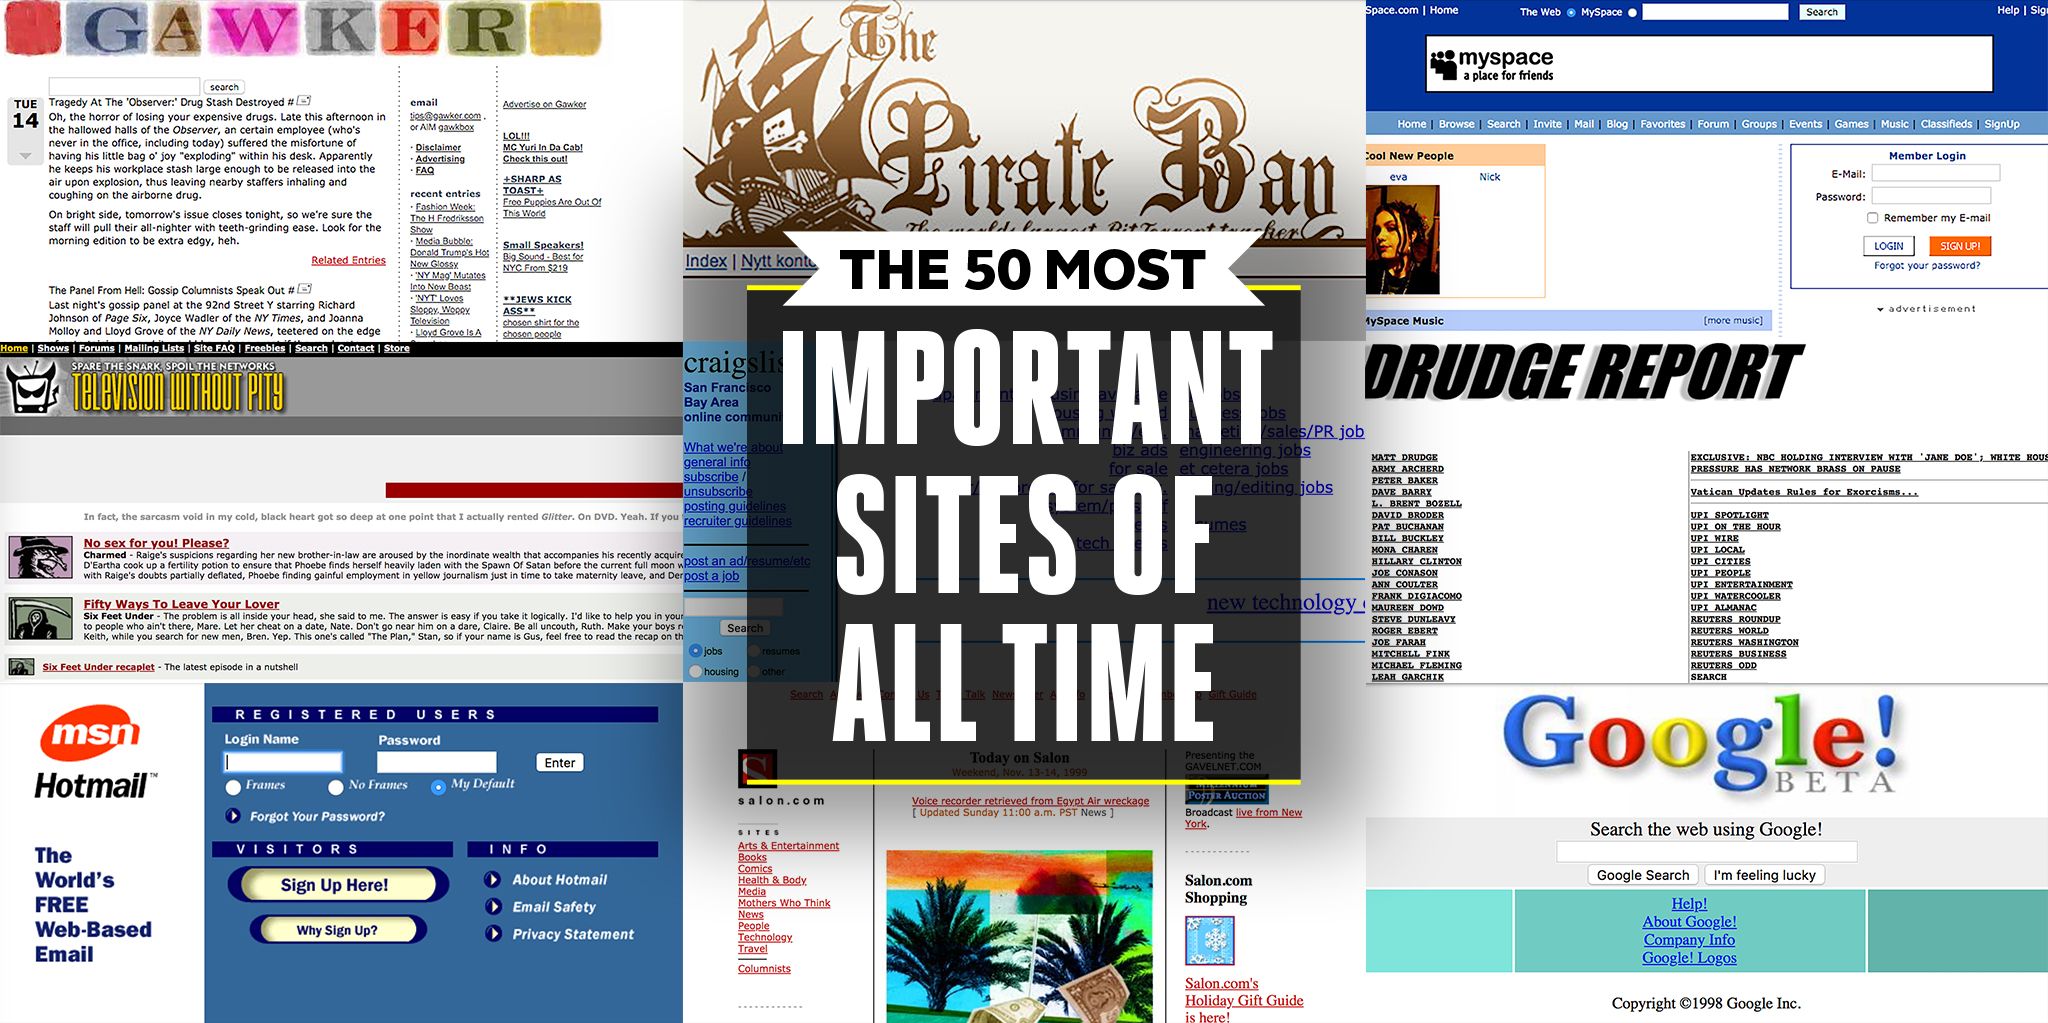 The Best Websites Ever Best Sites 2019 Most Influential Sites pic